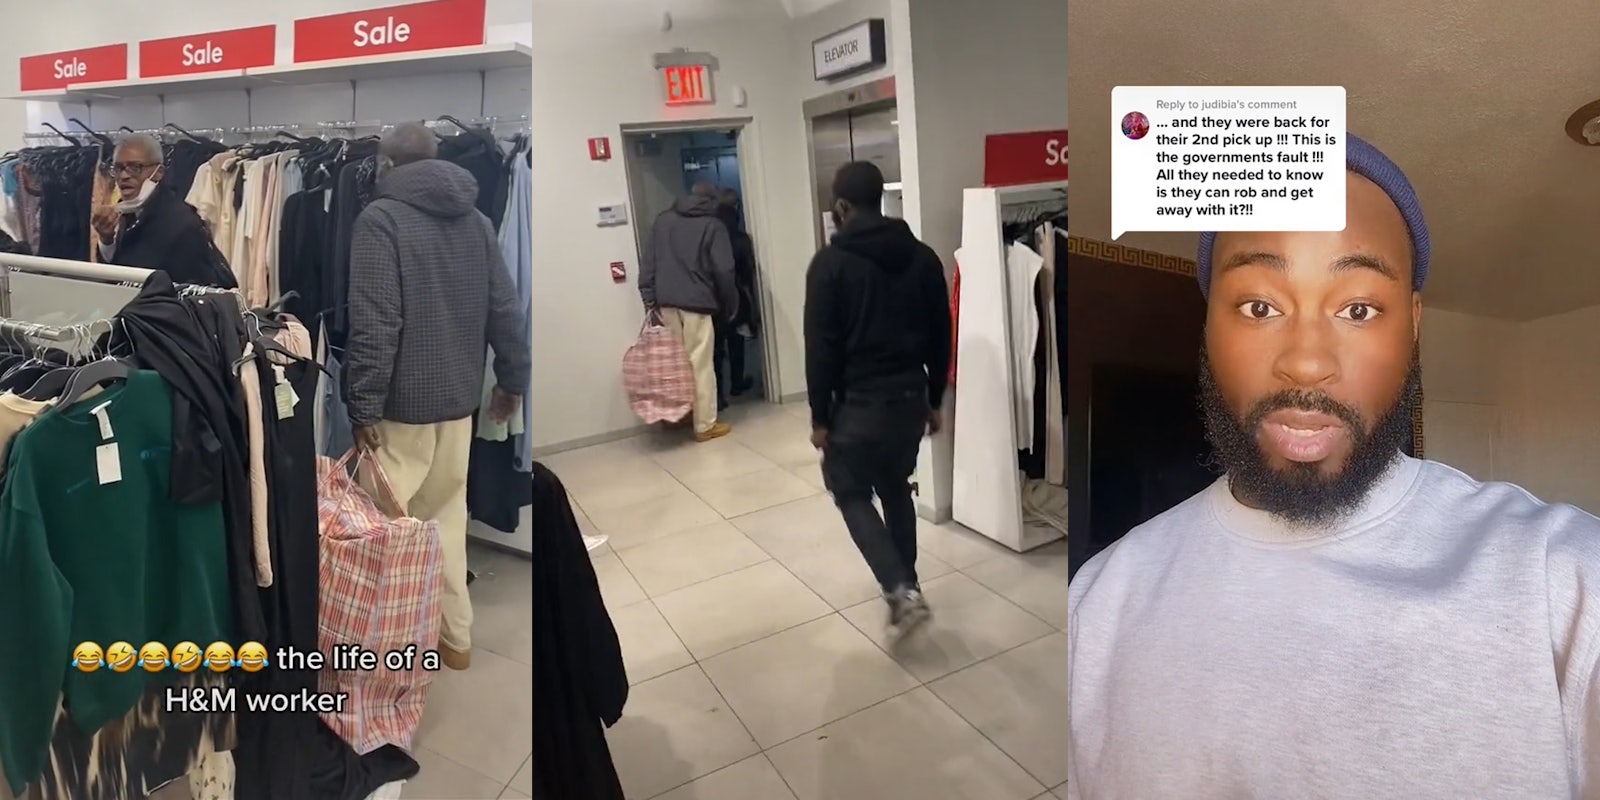 men walking through store with bags and caption 'the life of a H&M worker' (l) men walking out of emergency exit followed by employee (c) man speaking with caption '...and they were back for their 2nd pick up!!! this is the governments fault! all they needed to know is they can rob and get away with it??'